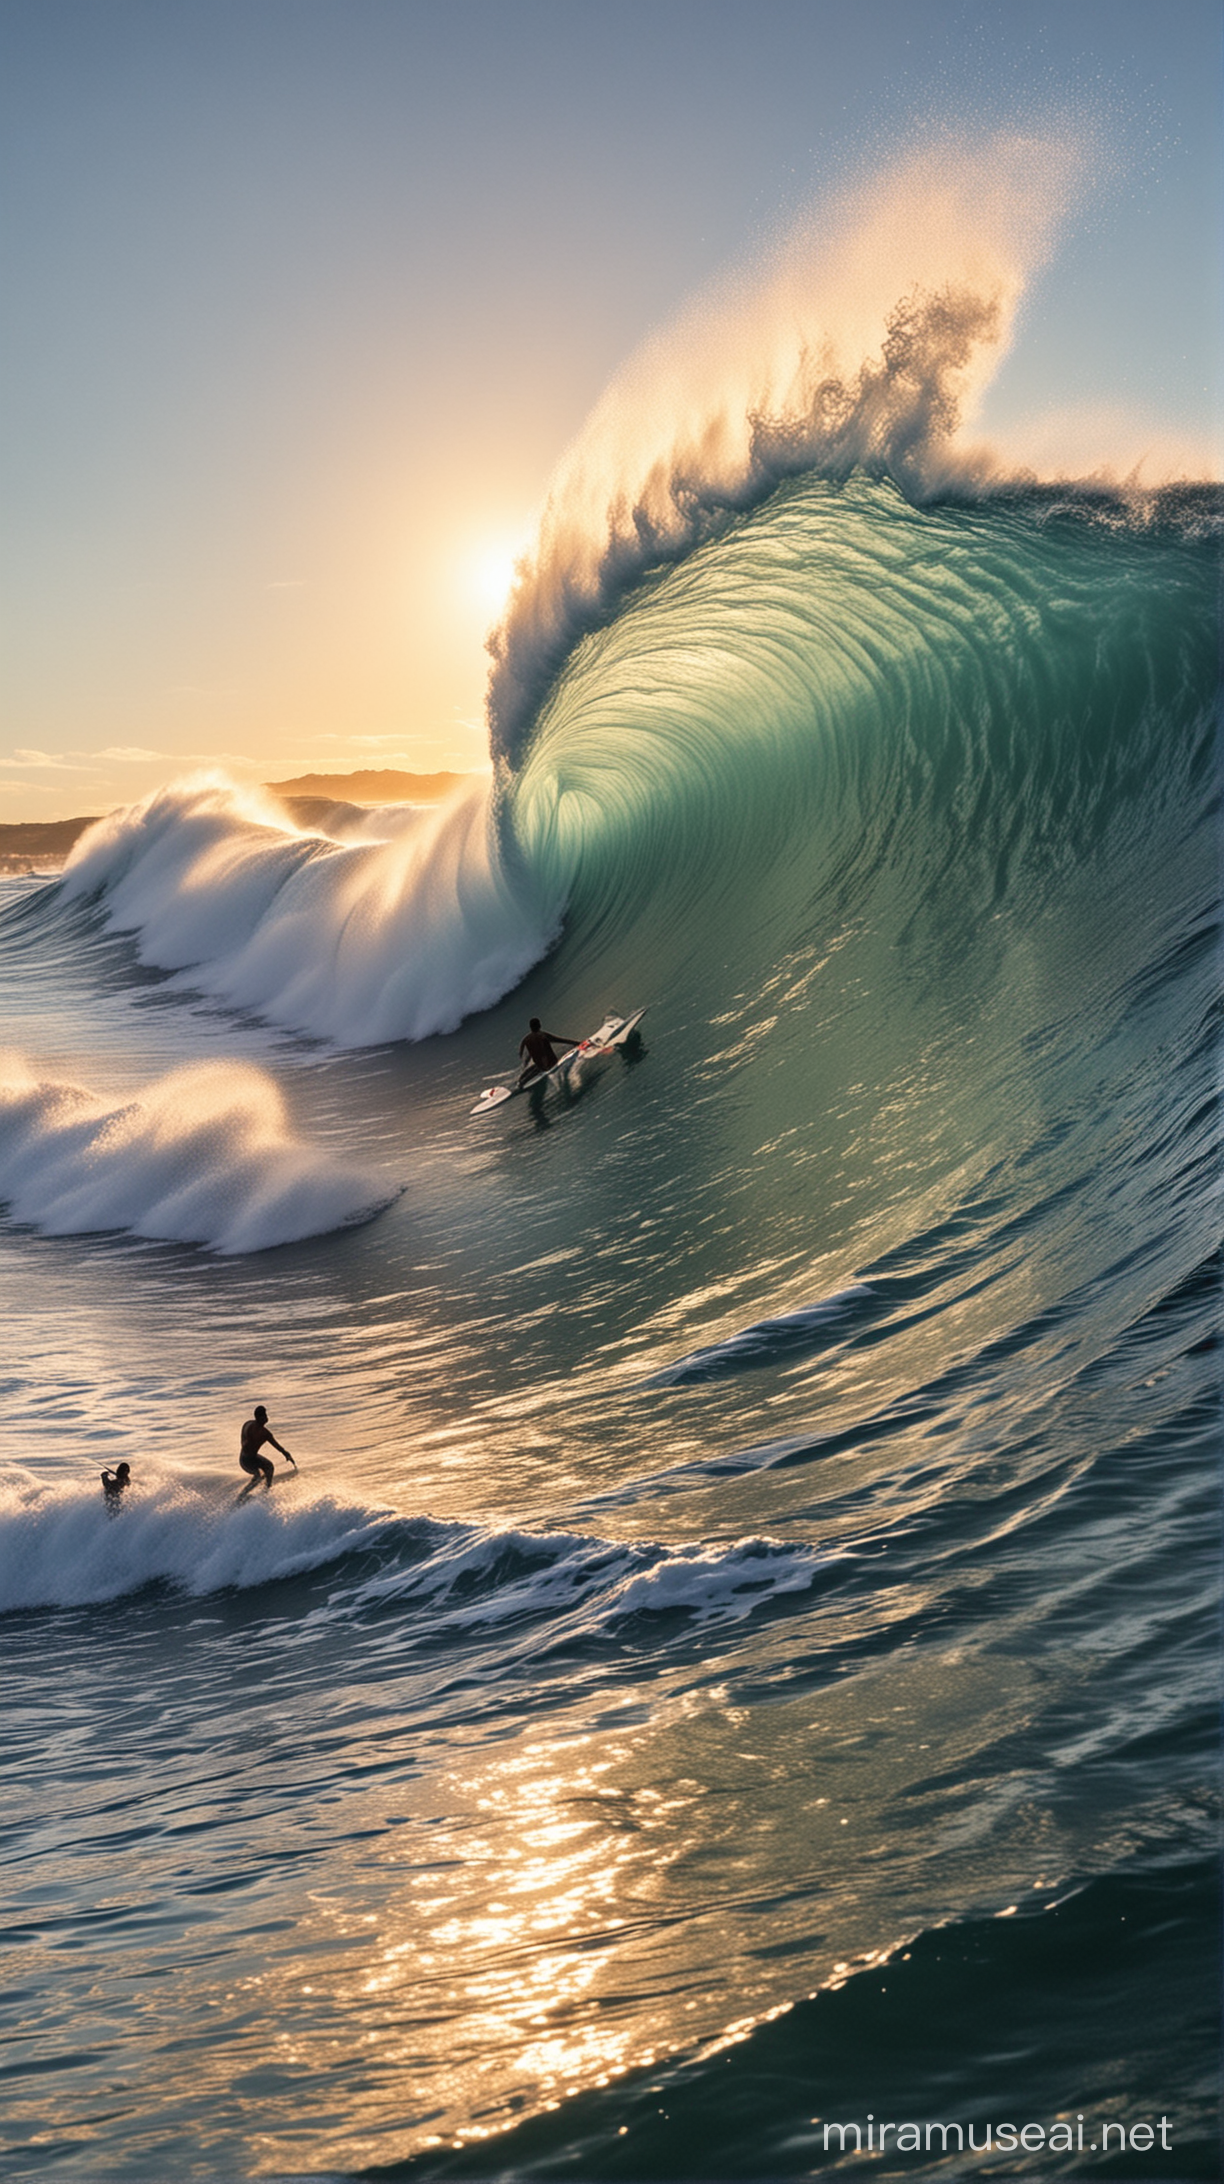 Elegant Surf Party Capturing The Most Perfect Wave of the World